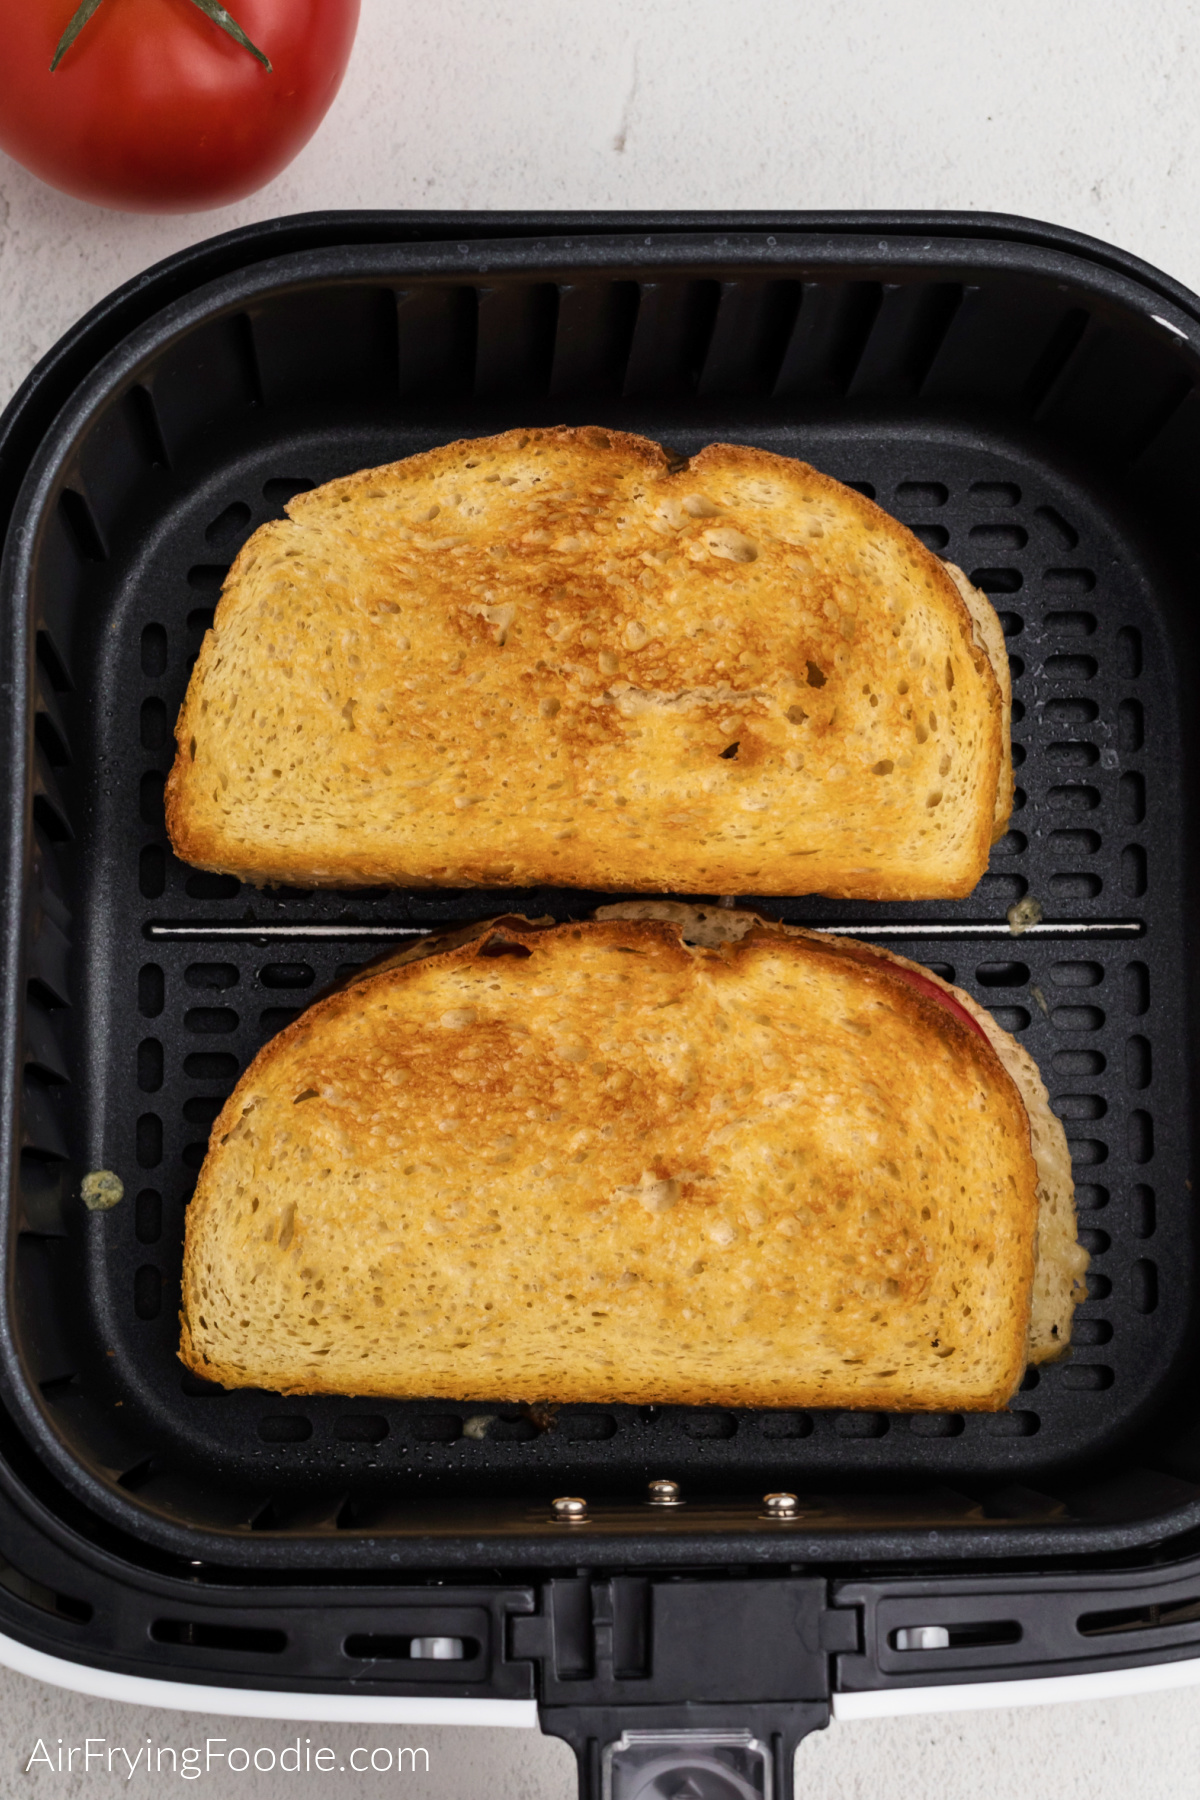 Grilled tomato and cheese sandwich in the basket of the air fryer.